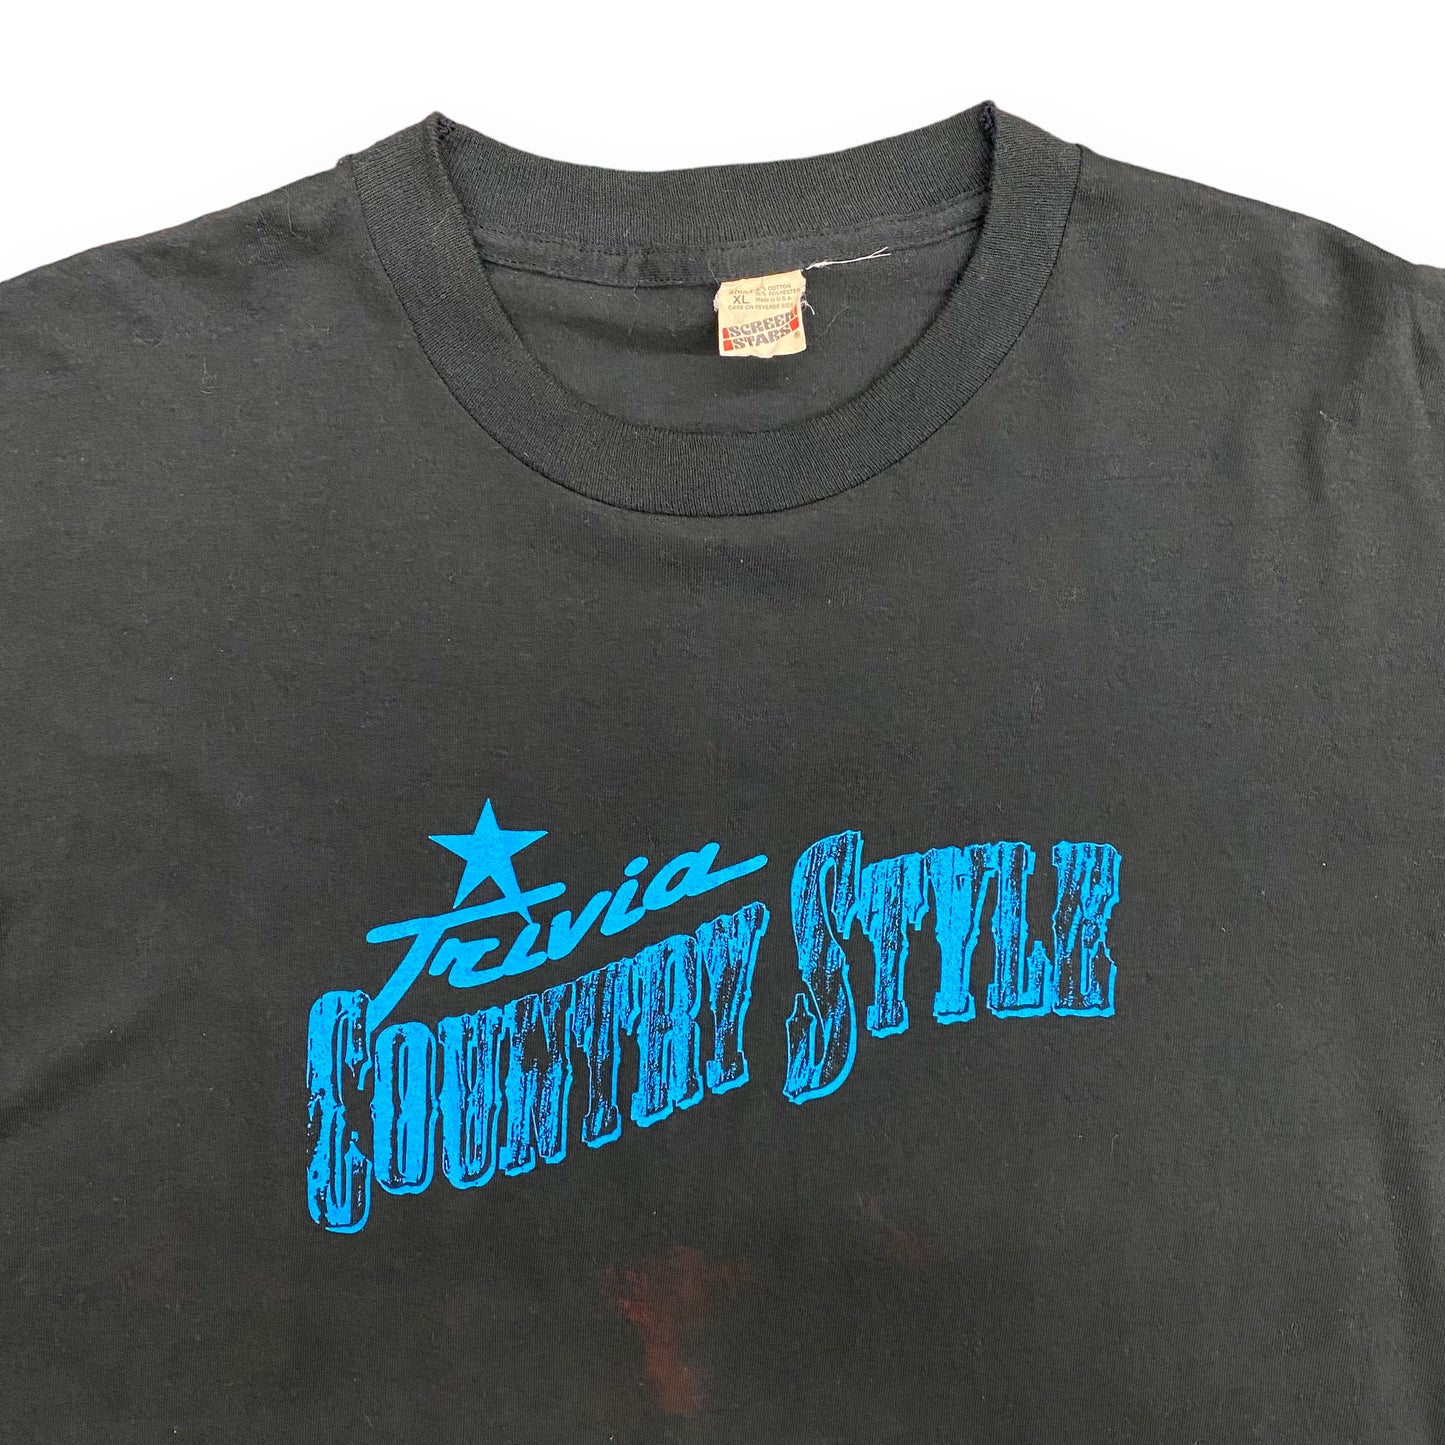 Vintage 1980s Trivia: Country Style Black Tee - Size XL